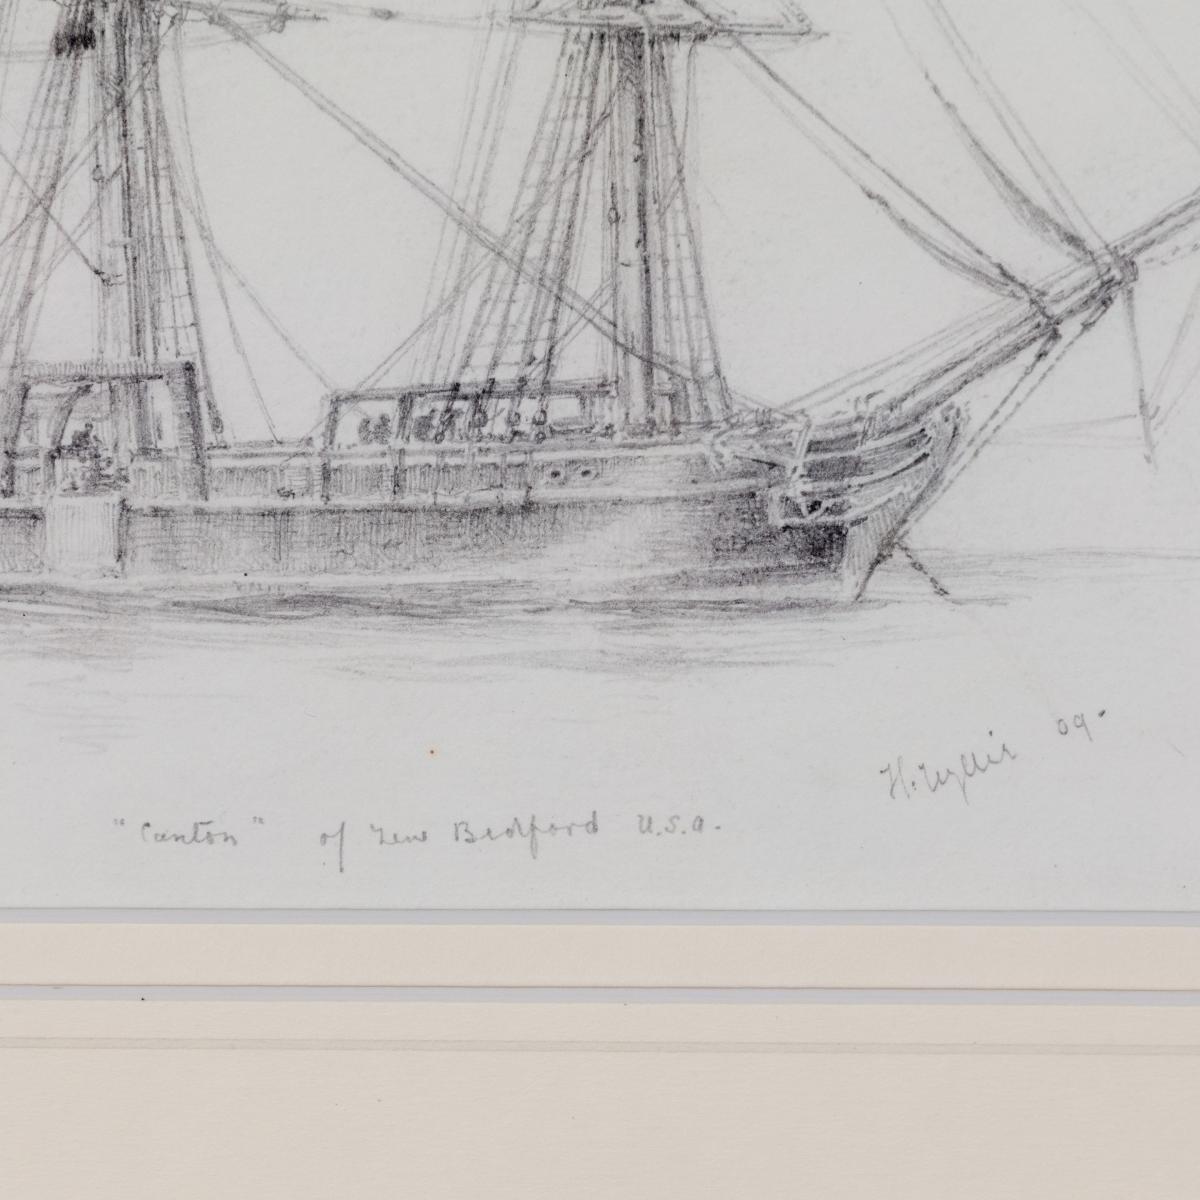 An unusual pencil drawing of “Canton“ a three masted whaling ship by Harold Wylie